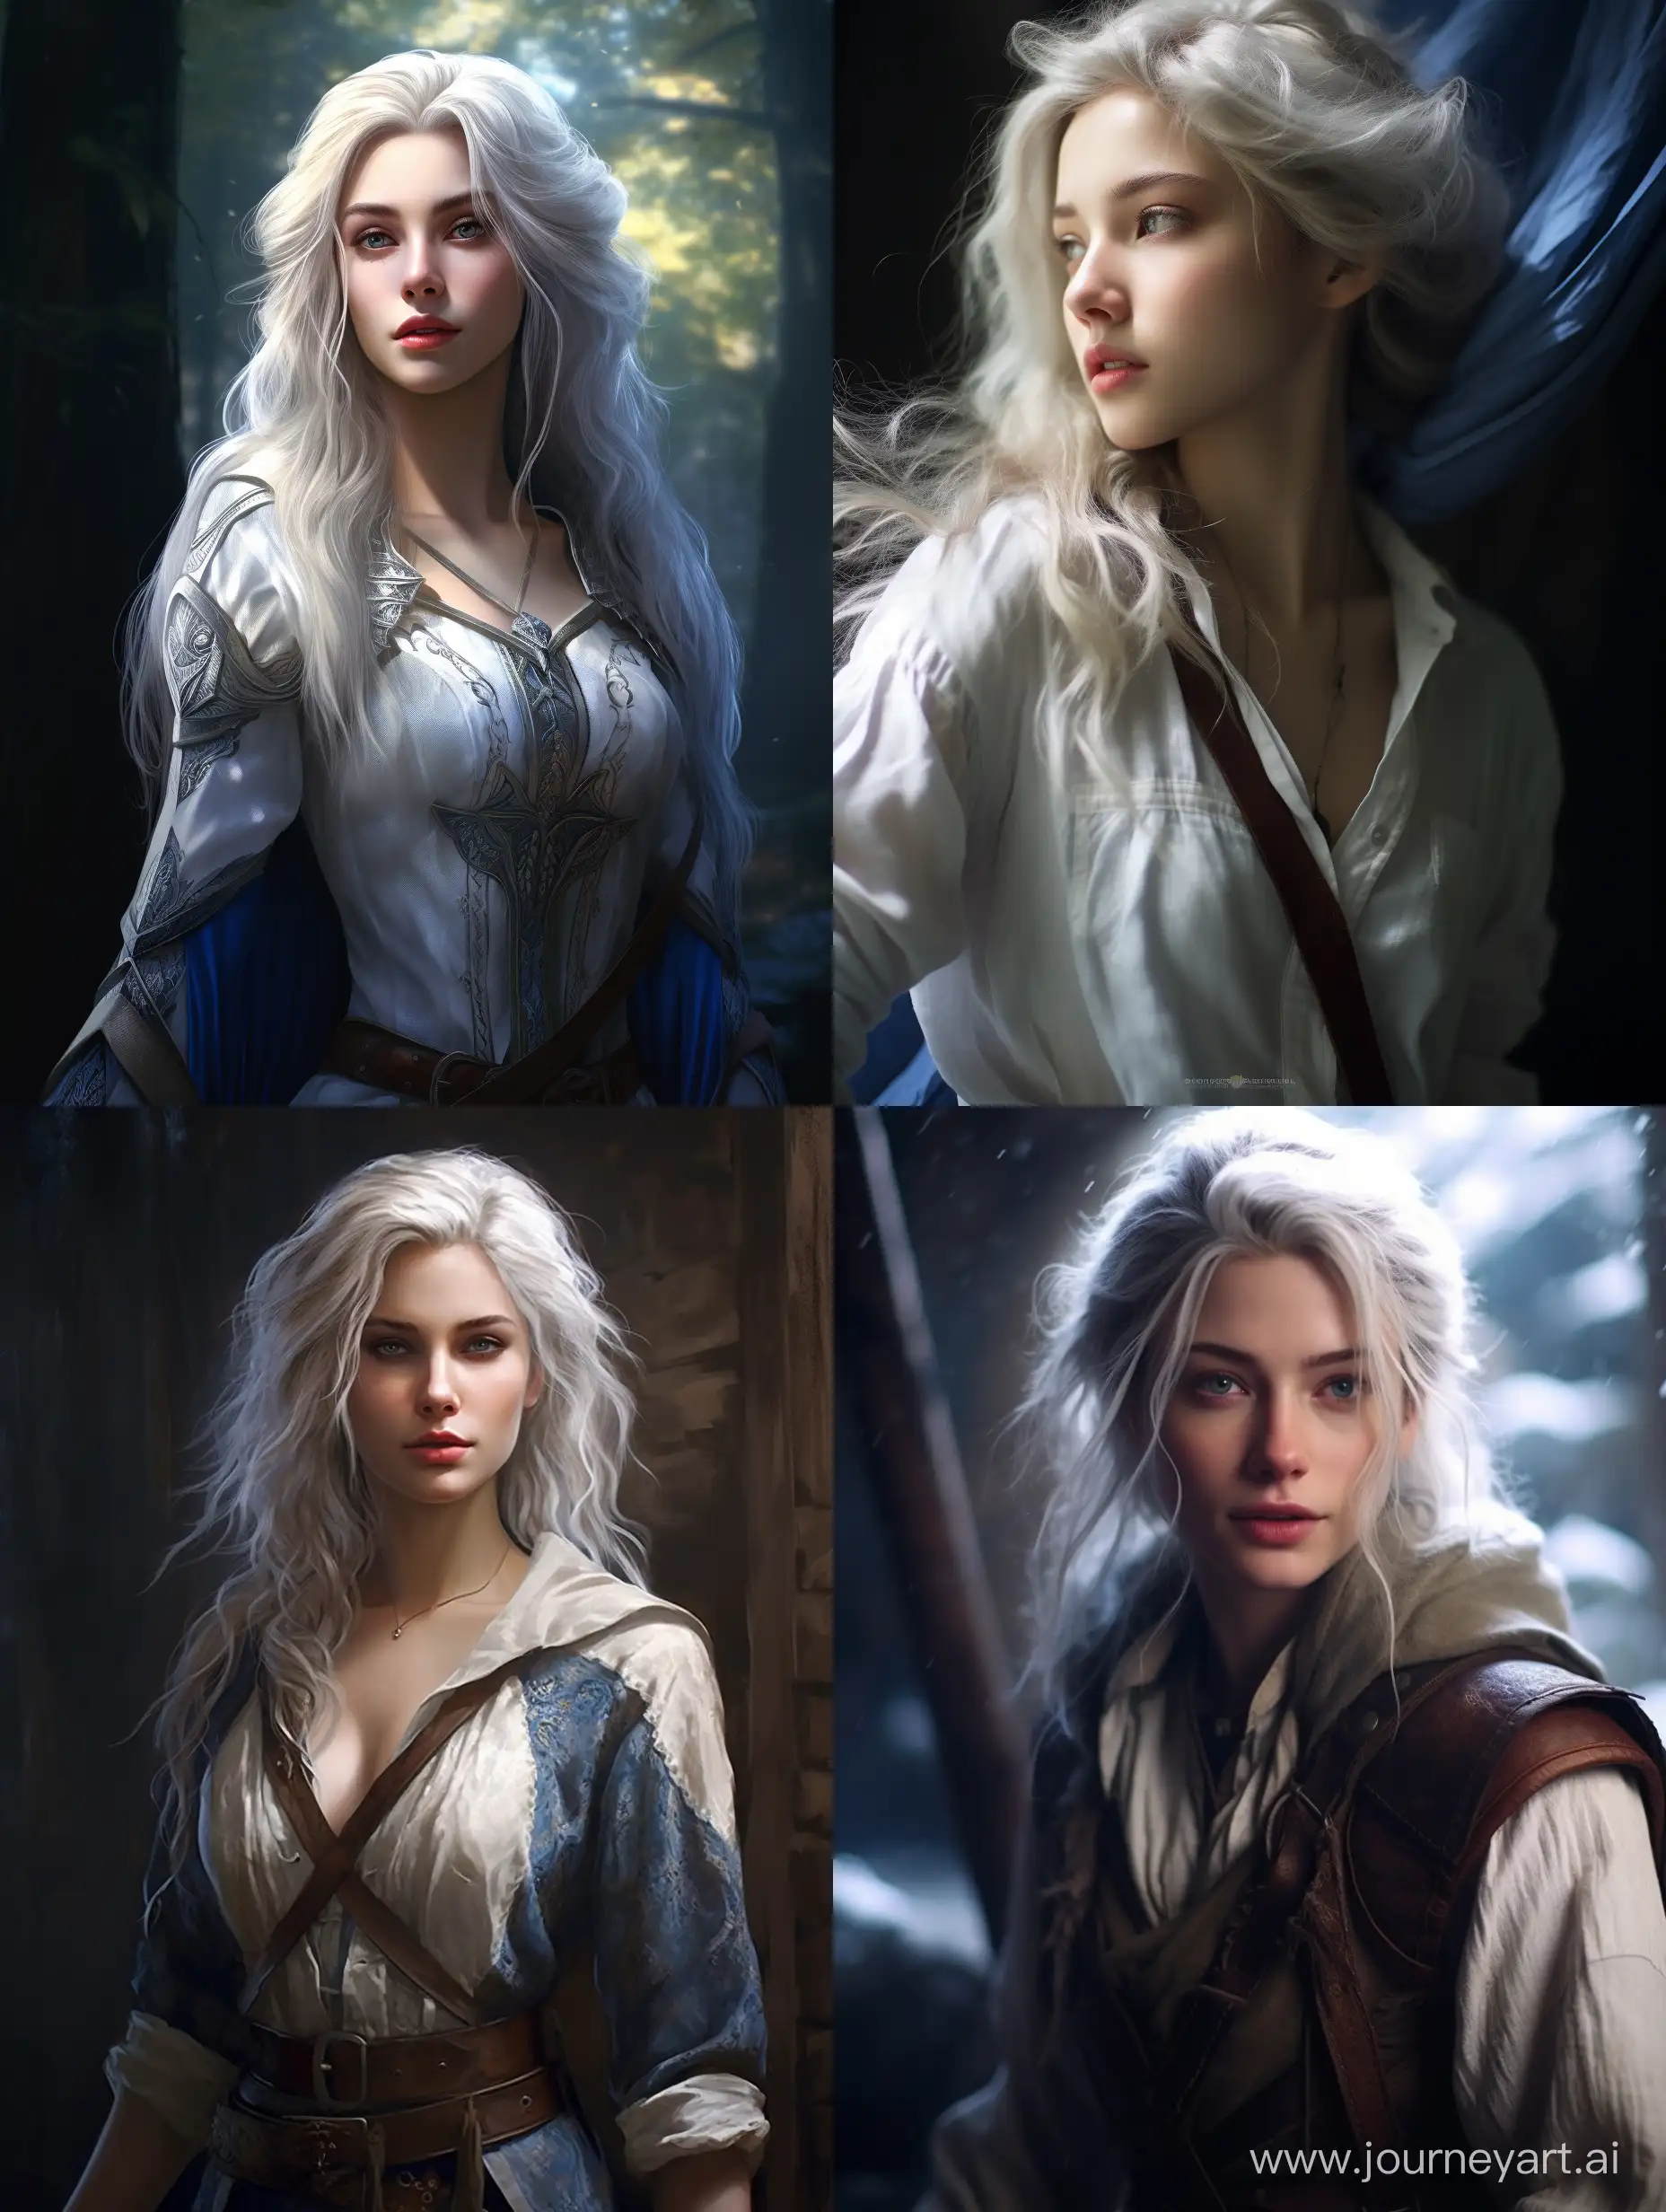 Enchanting-WhiteHaired-Elf-Explorer-in-Blue-and-White-Attire